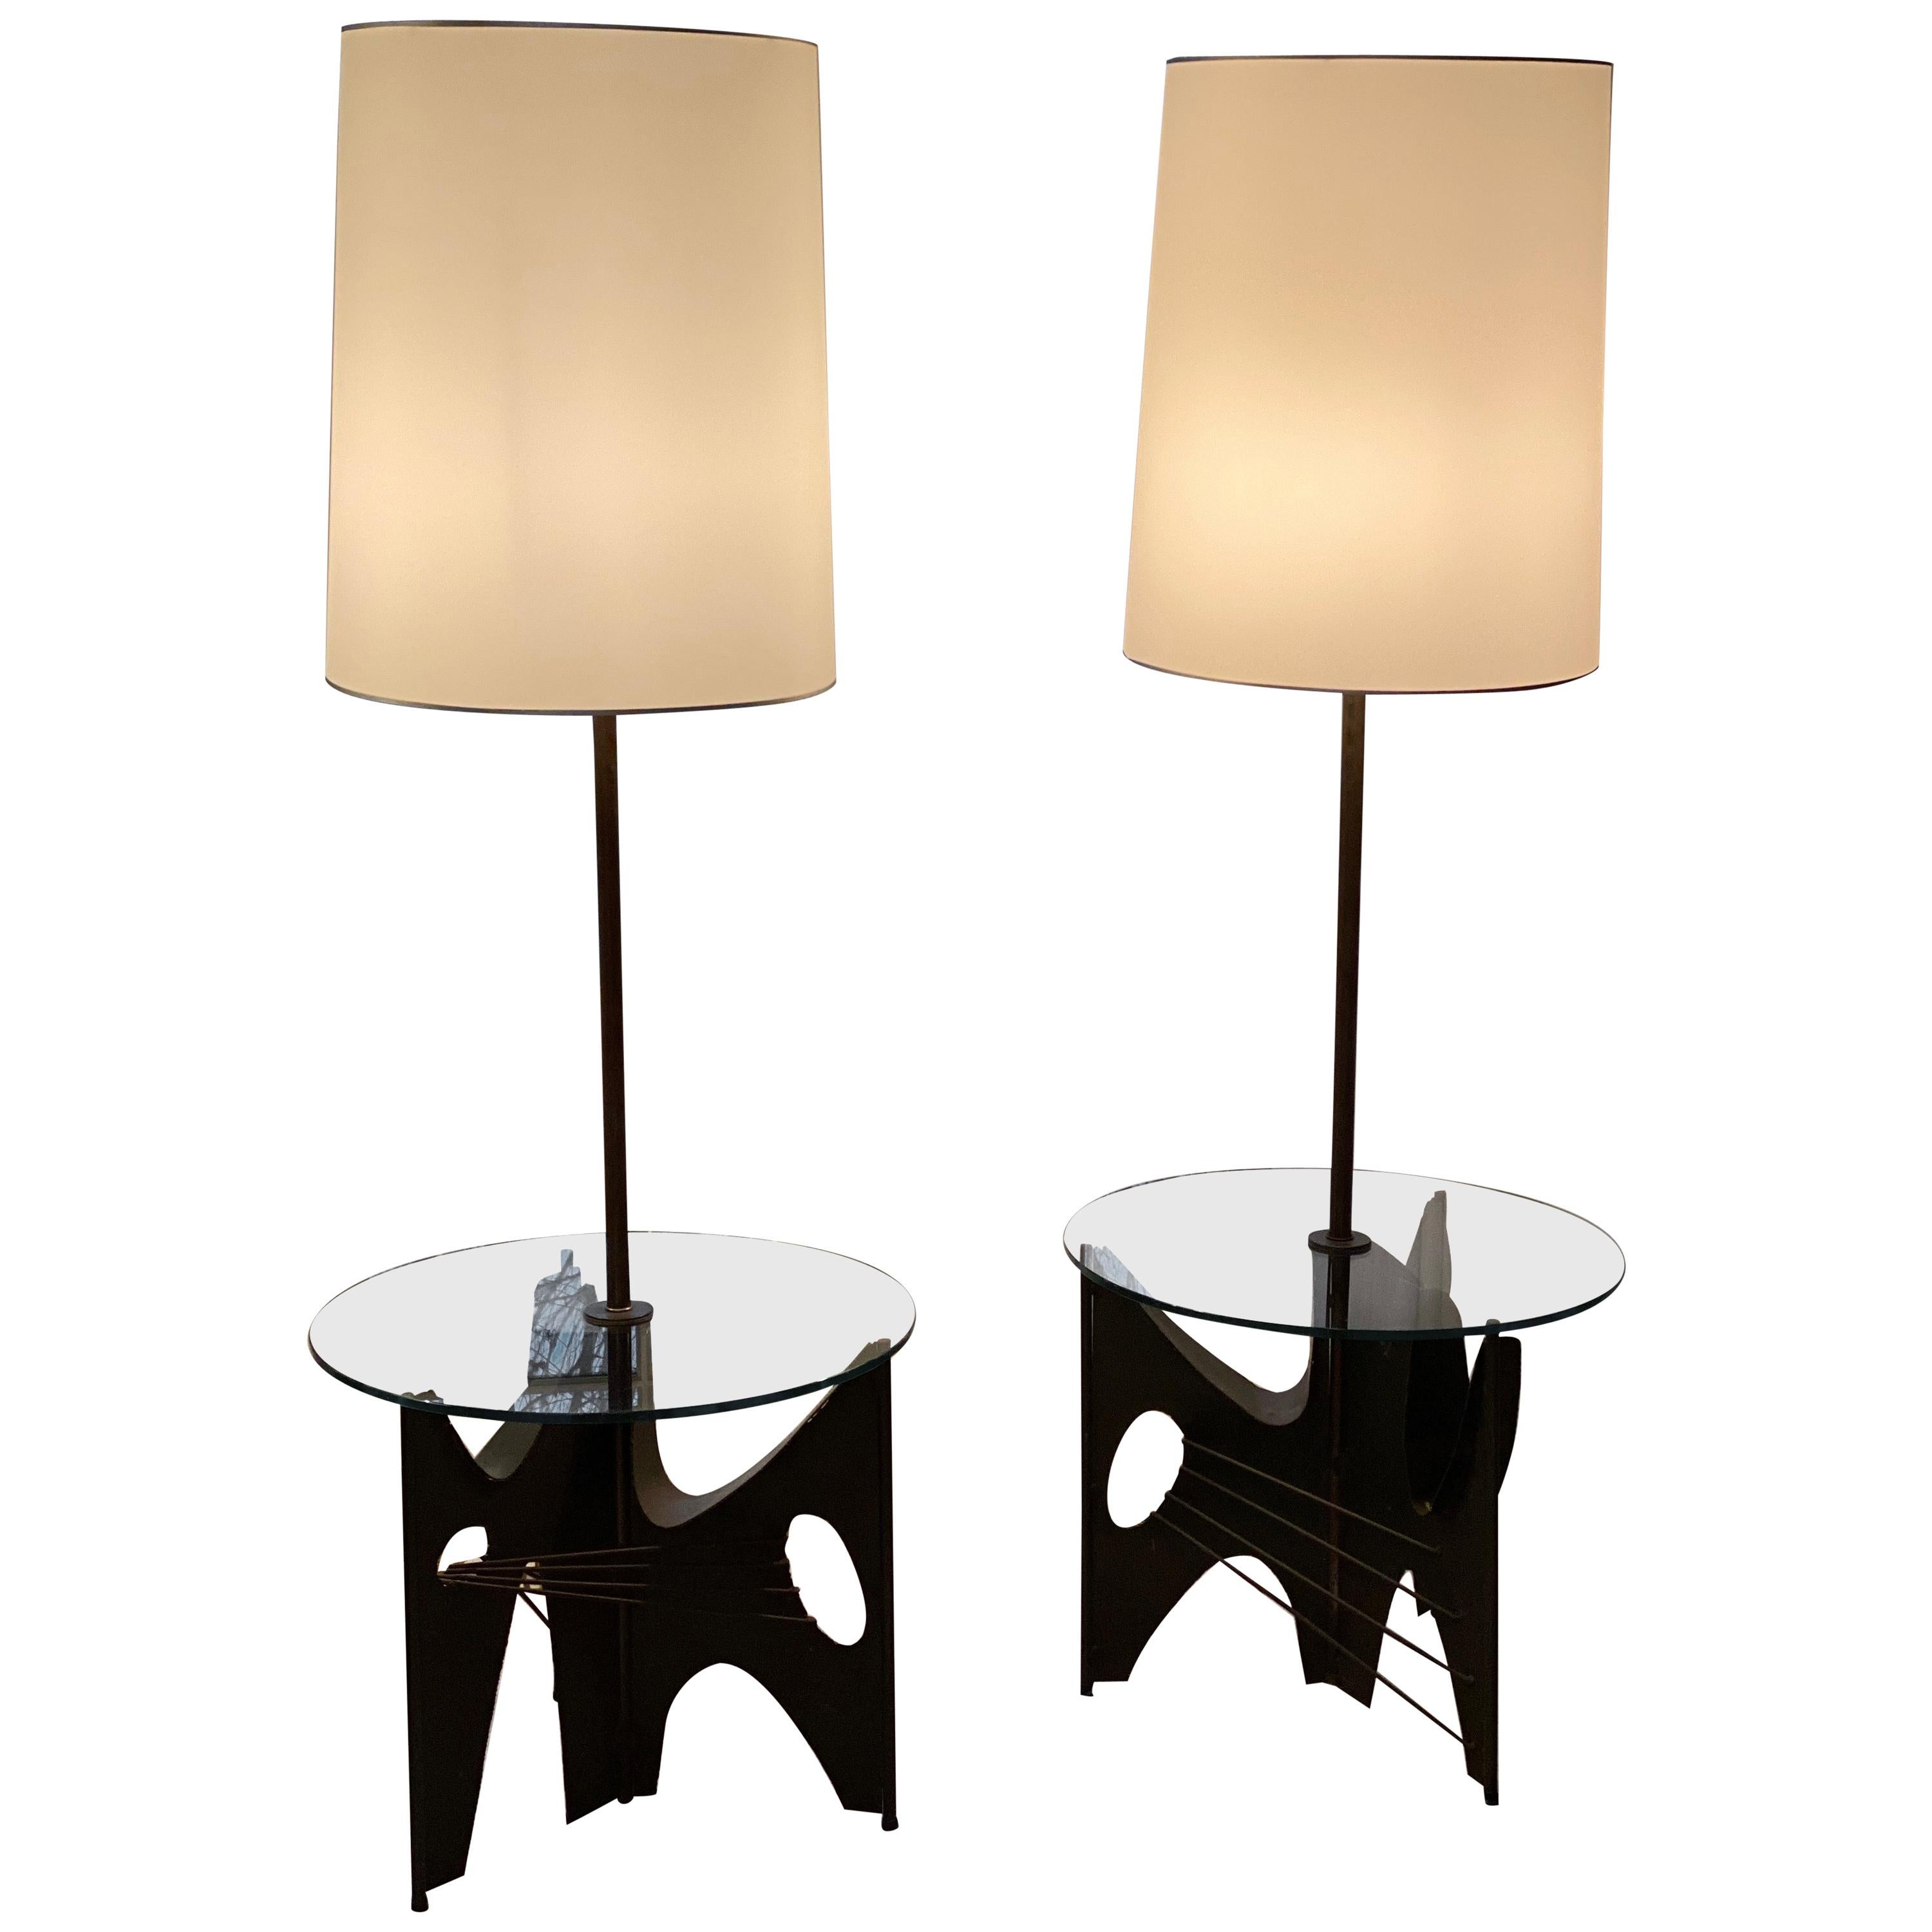 Pair of Brutalist metal floor lamps with table by Harry Balmer for Laurel.
Black metal base and stem with round glass table tops. Shades were custom made for lamps, not original shades.
Measures: 18” x 22” shade
Glass top 22” round
Approx 60”